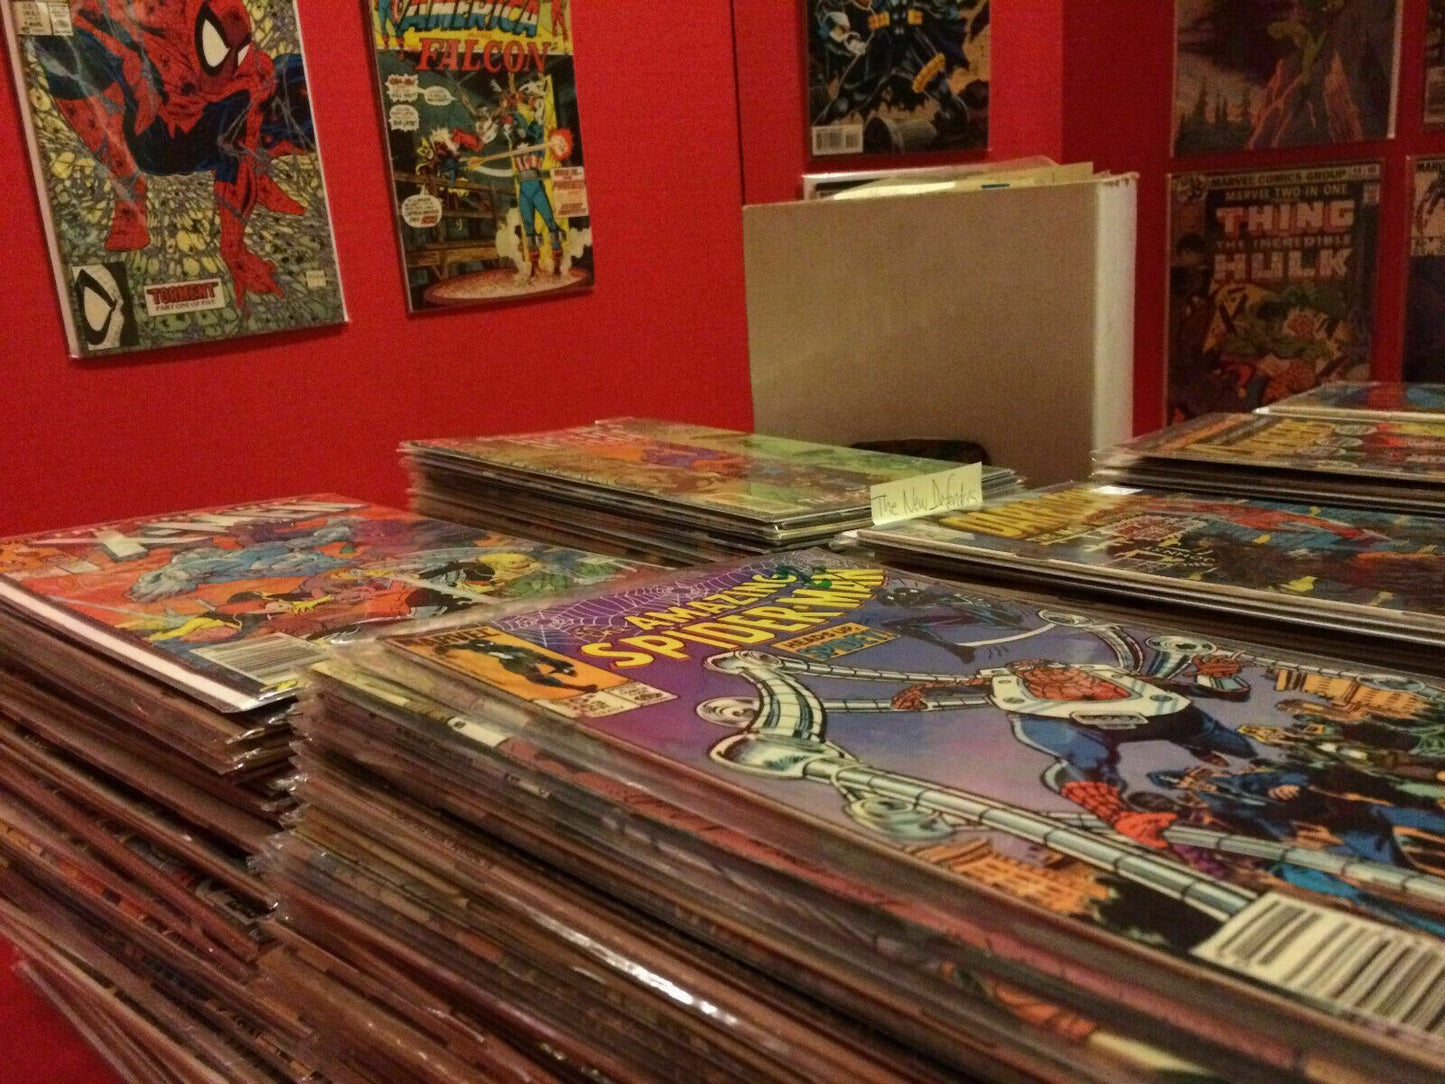 Huge 100 Comic Book Lot-Marvel, Dc, Indy -All Vf To Nm+ Condition No Duplicates